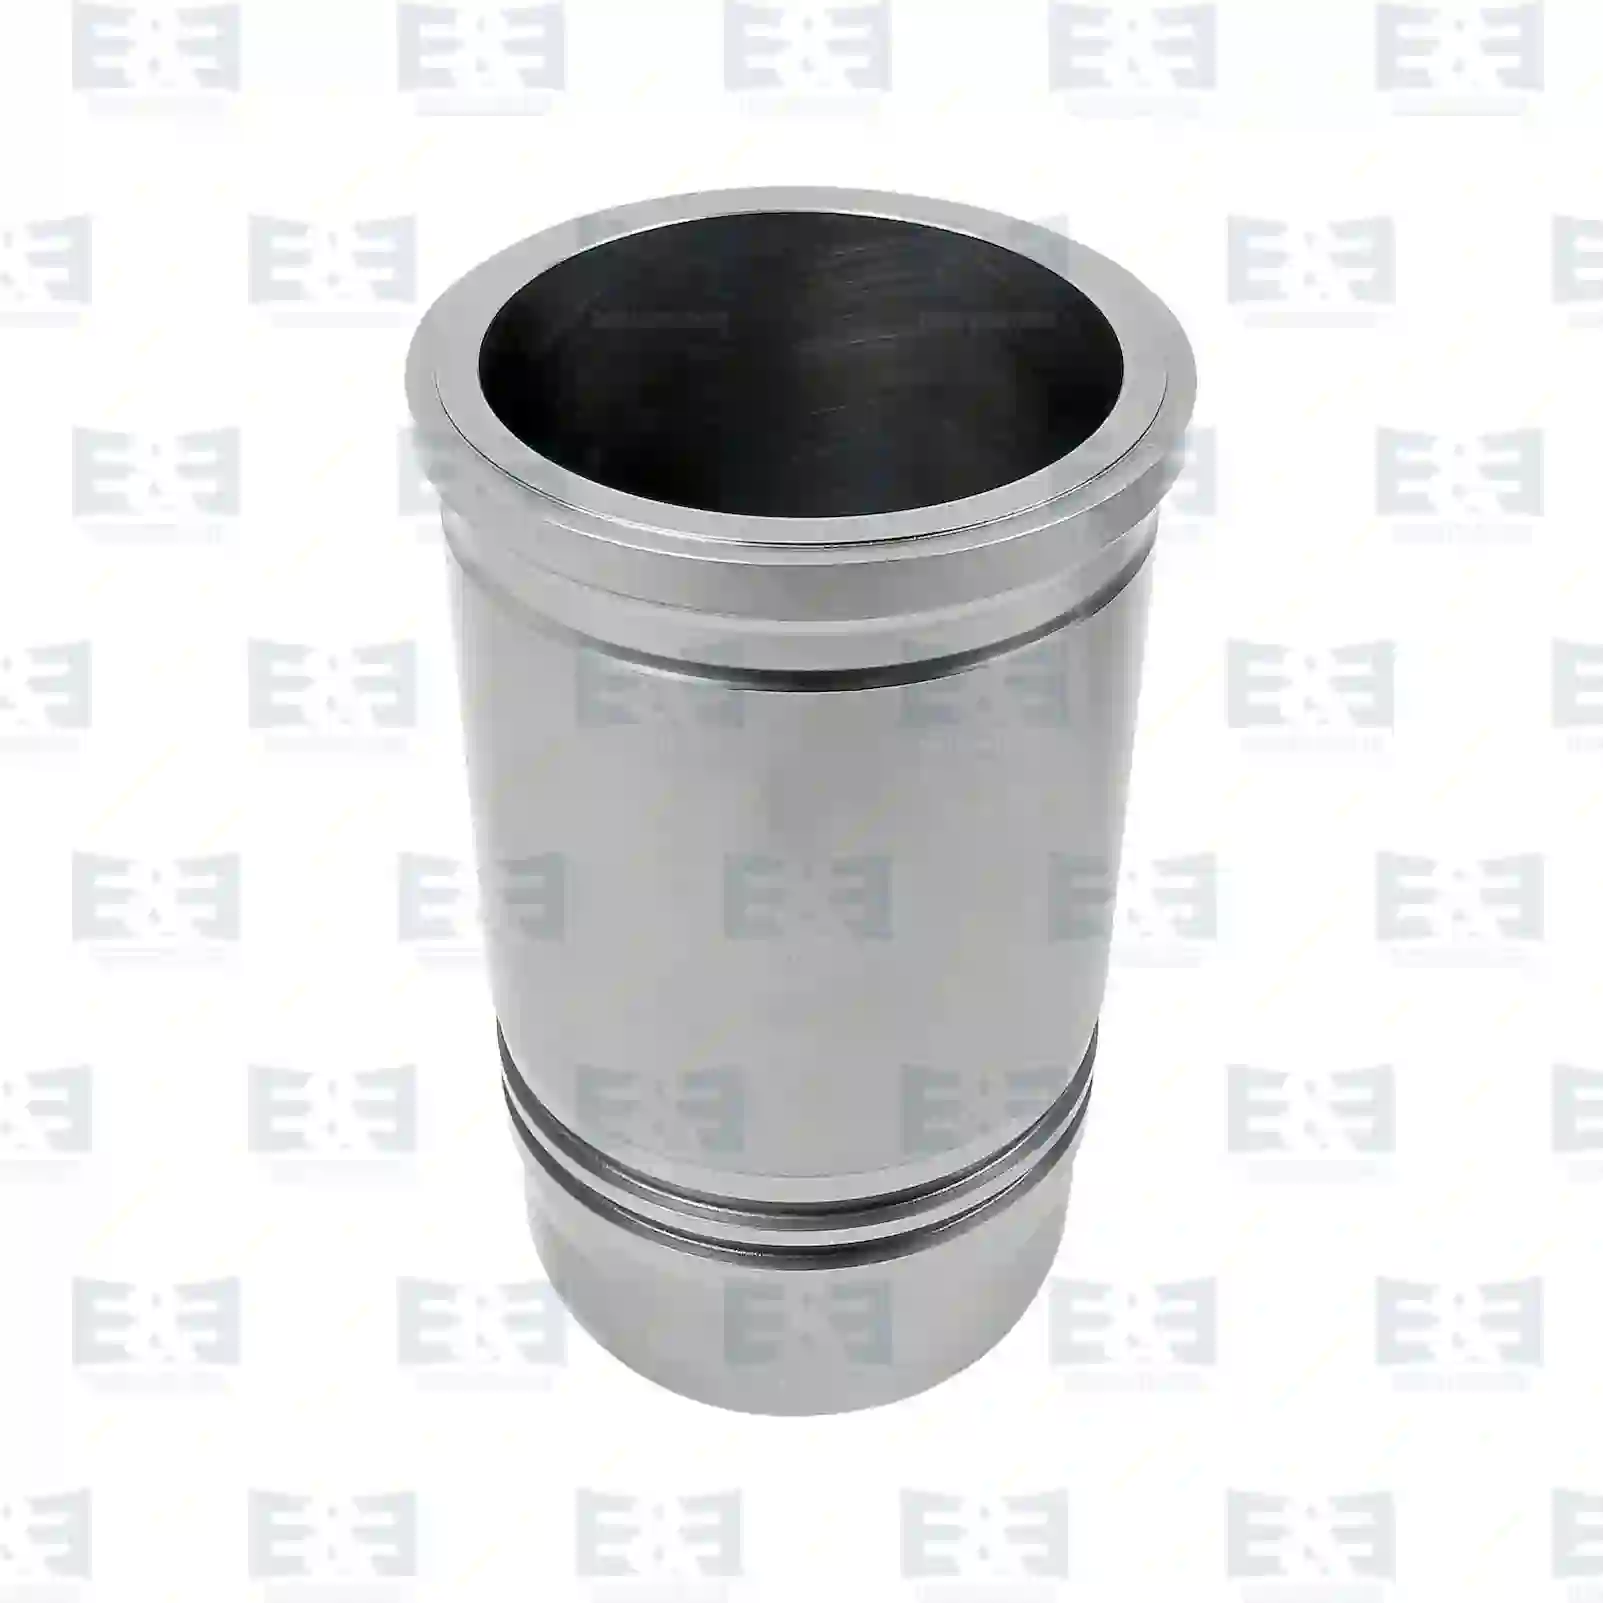 Cylinder liner, without seal rings, 2E2209012, 3965427, , , ||  2E2209012 E&E Truck Spare Parts | Truck Spare Parts, Auotomotive Spare Parts Cylinder liner, without seal rings, 2E2209012, 3965427, , , ||  2E2209012 E&E Truck Spare Parts | Truck Spare Parts, Auotomotive Spare Parts